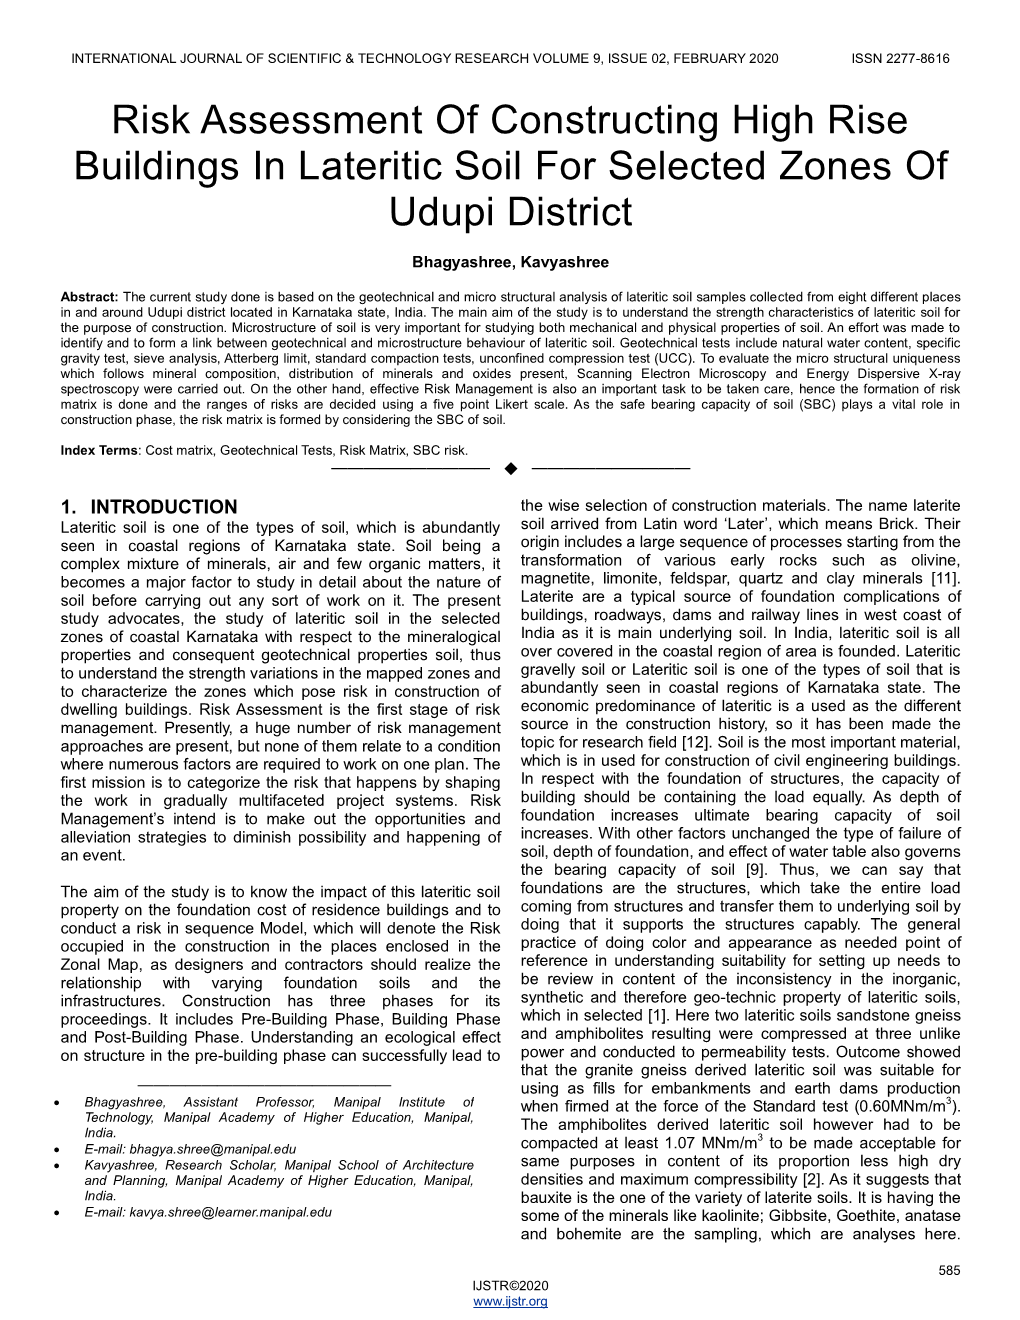 Risk Assessment of Constructing High Rise Buildings in Lateritic Soil for Selected Zones of Udupi District